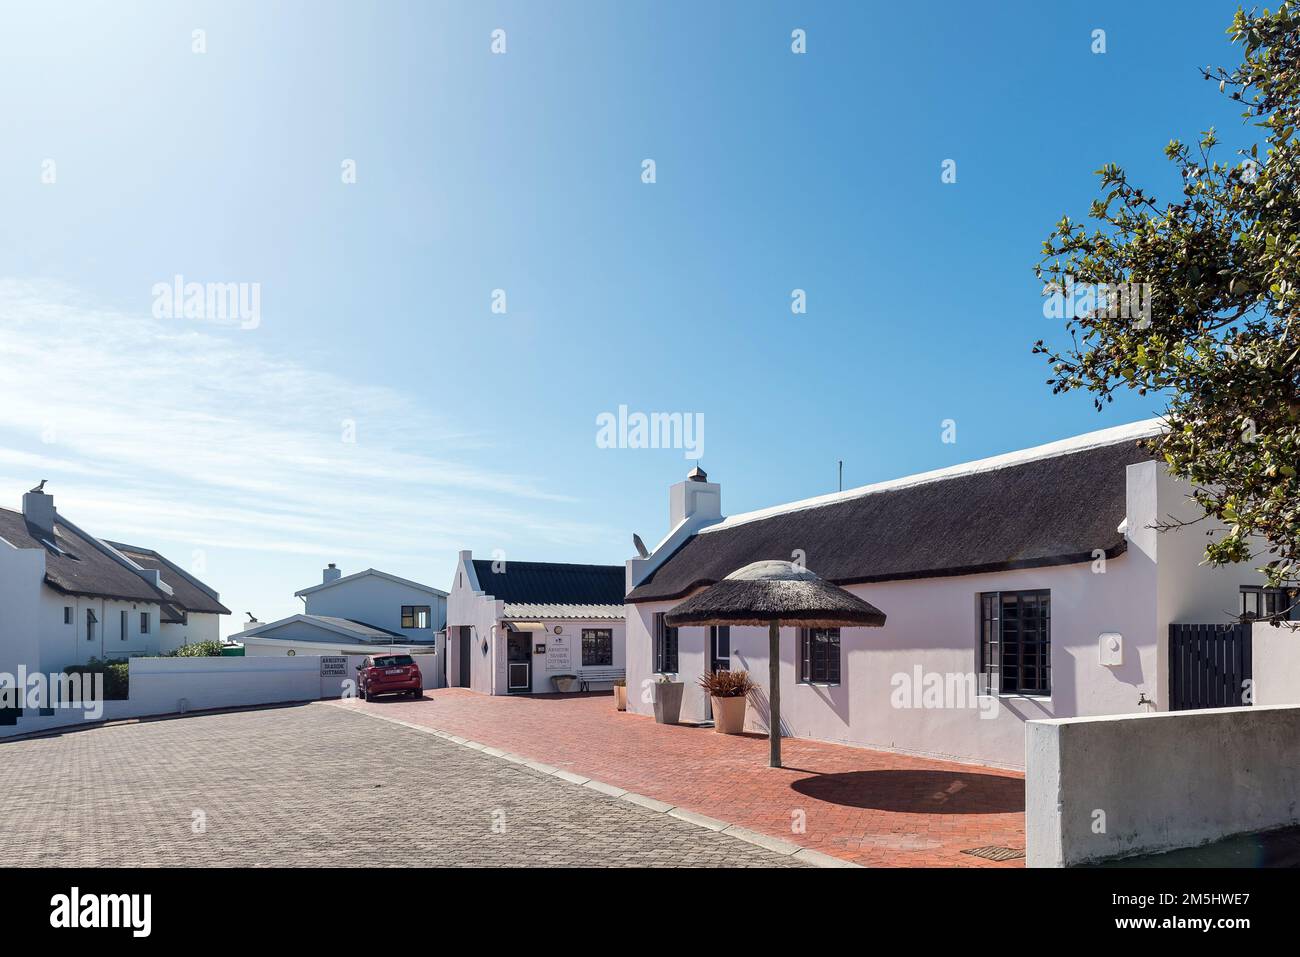 Arniston, South Africa - Sep 22, 2022: A street scene, with the reception office of Arniston Seaside Cottages, in Arniston in the Western Cape Provinc Stock Photo